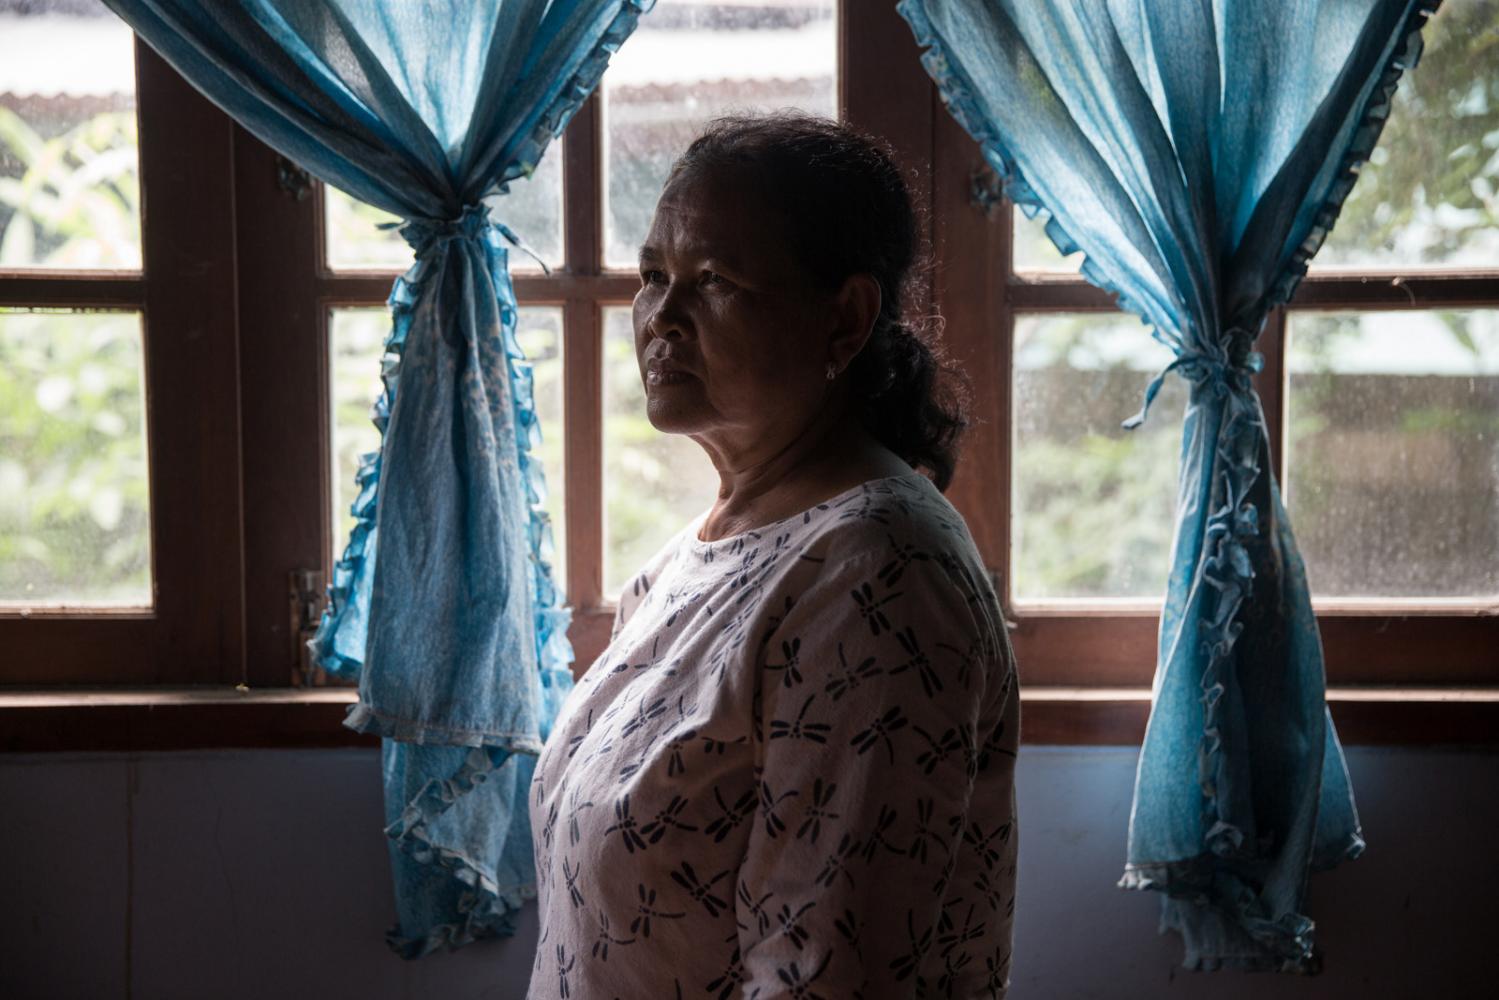 Lamduan Wongkhamchan, a core member of the community group, stands inside her house in Chok Chai...